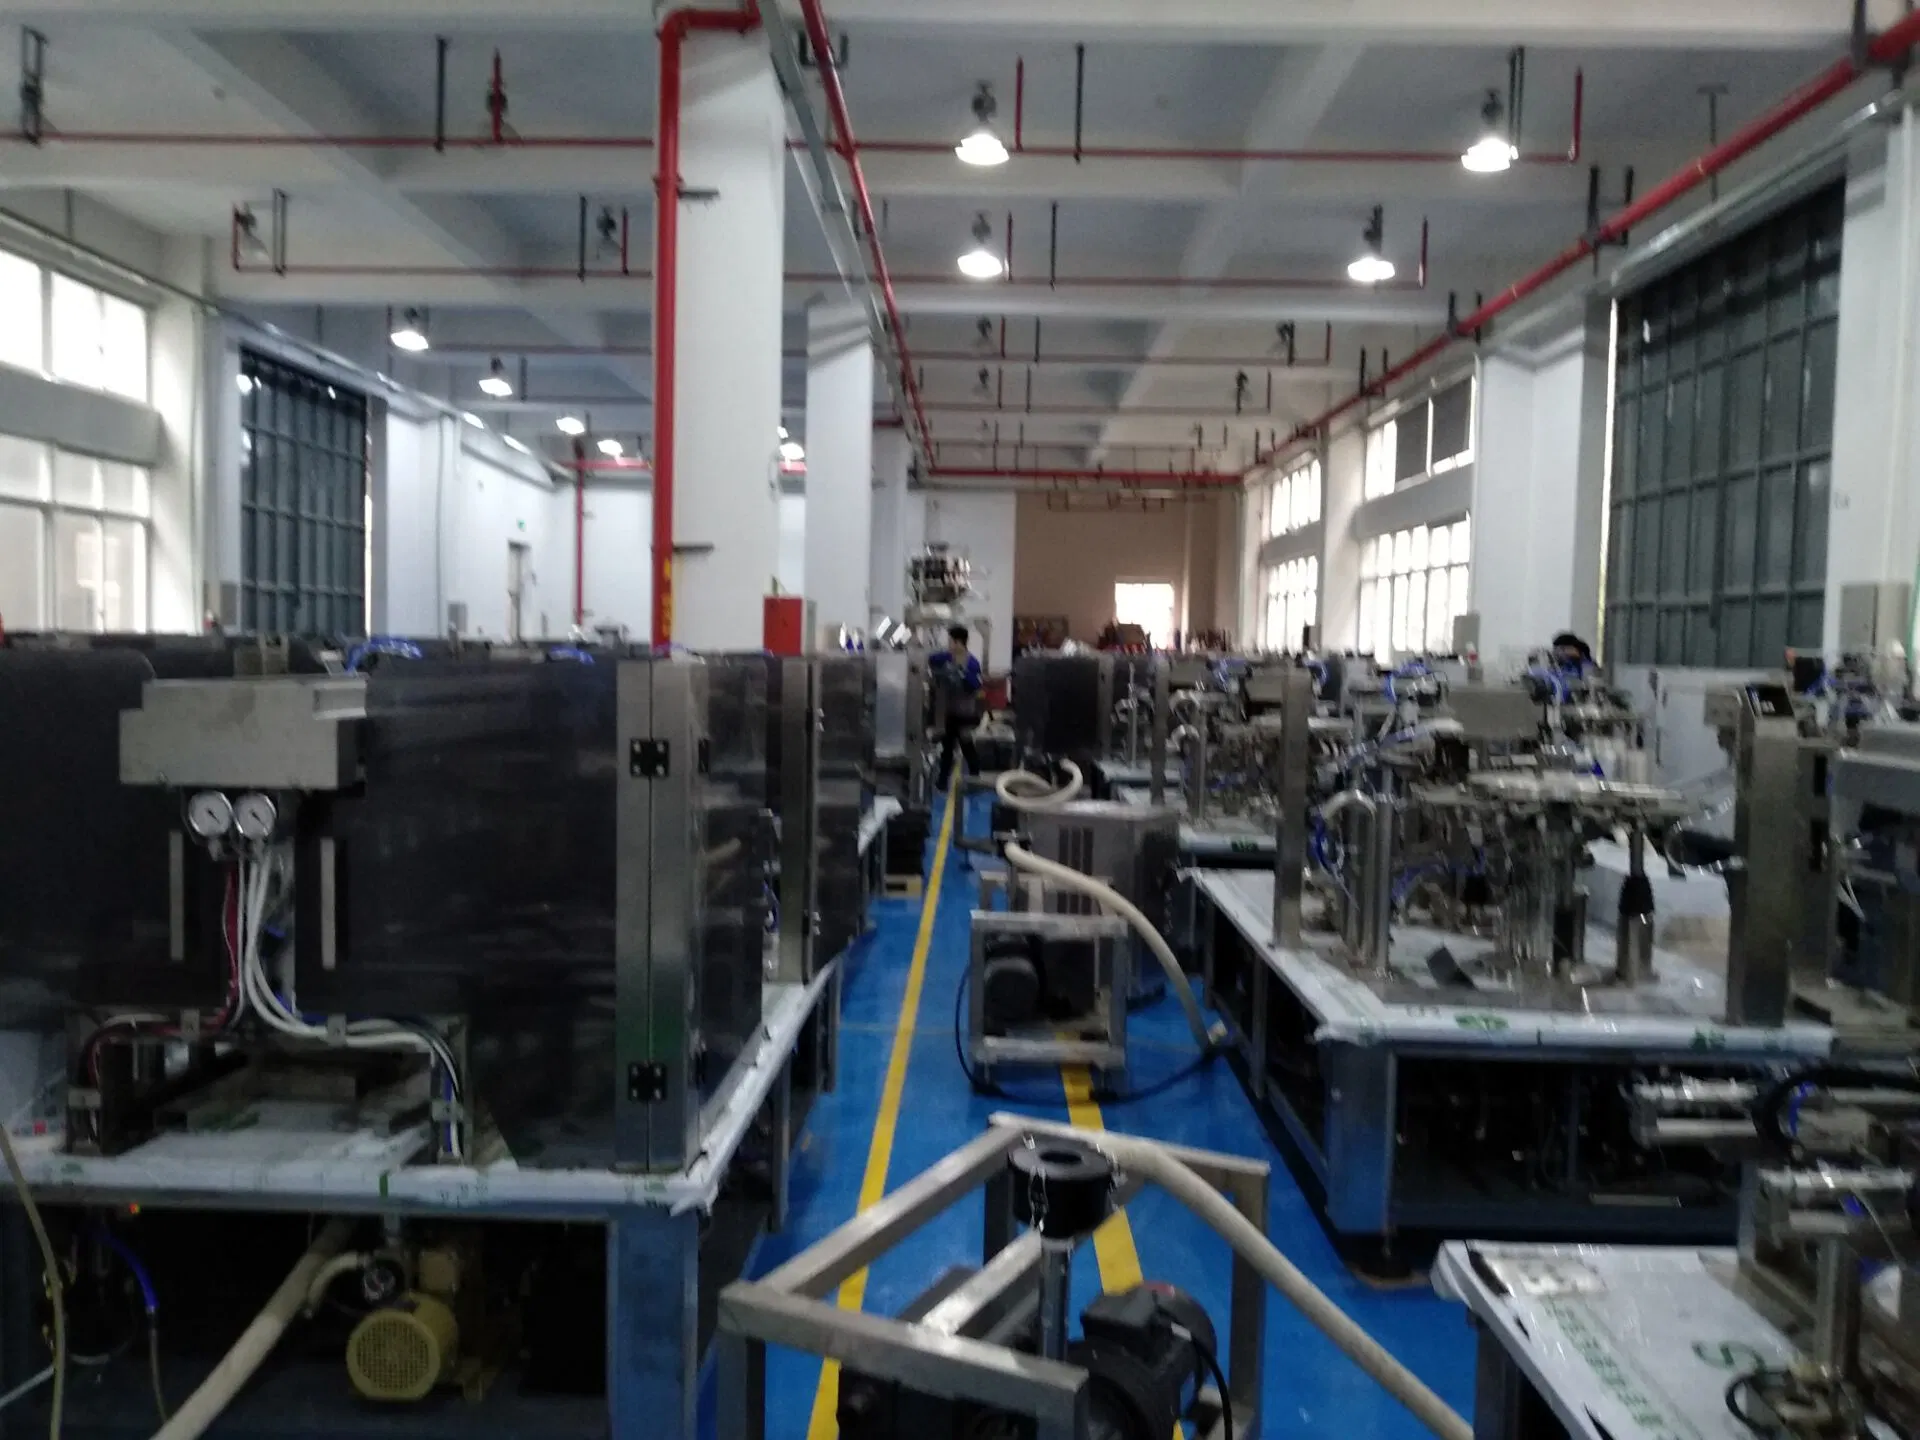 OEM Automatic Seasoning Filling Pouch Packing Machinery Doypack Bag Sealing Packaging Machine